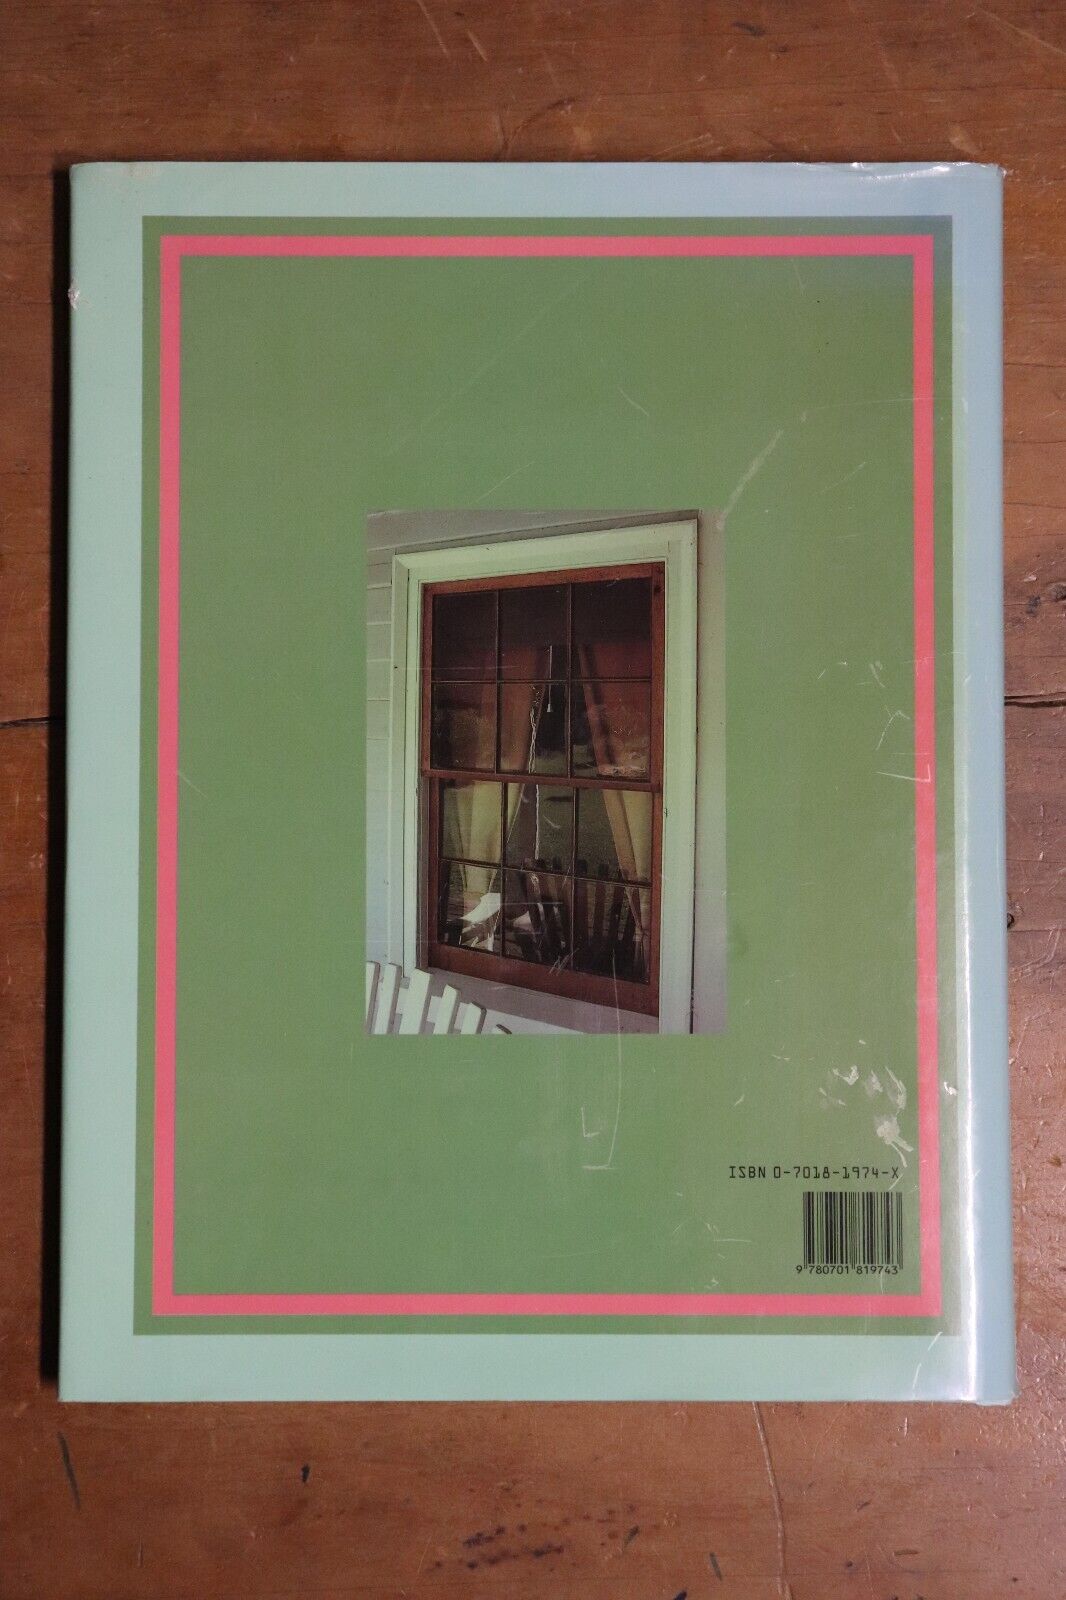 Australian Country Houses - 1987 - Australian History & Architecture Book